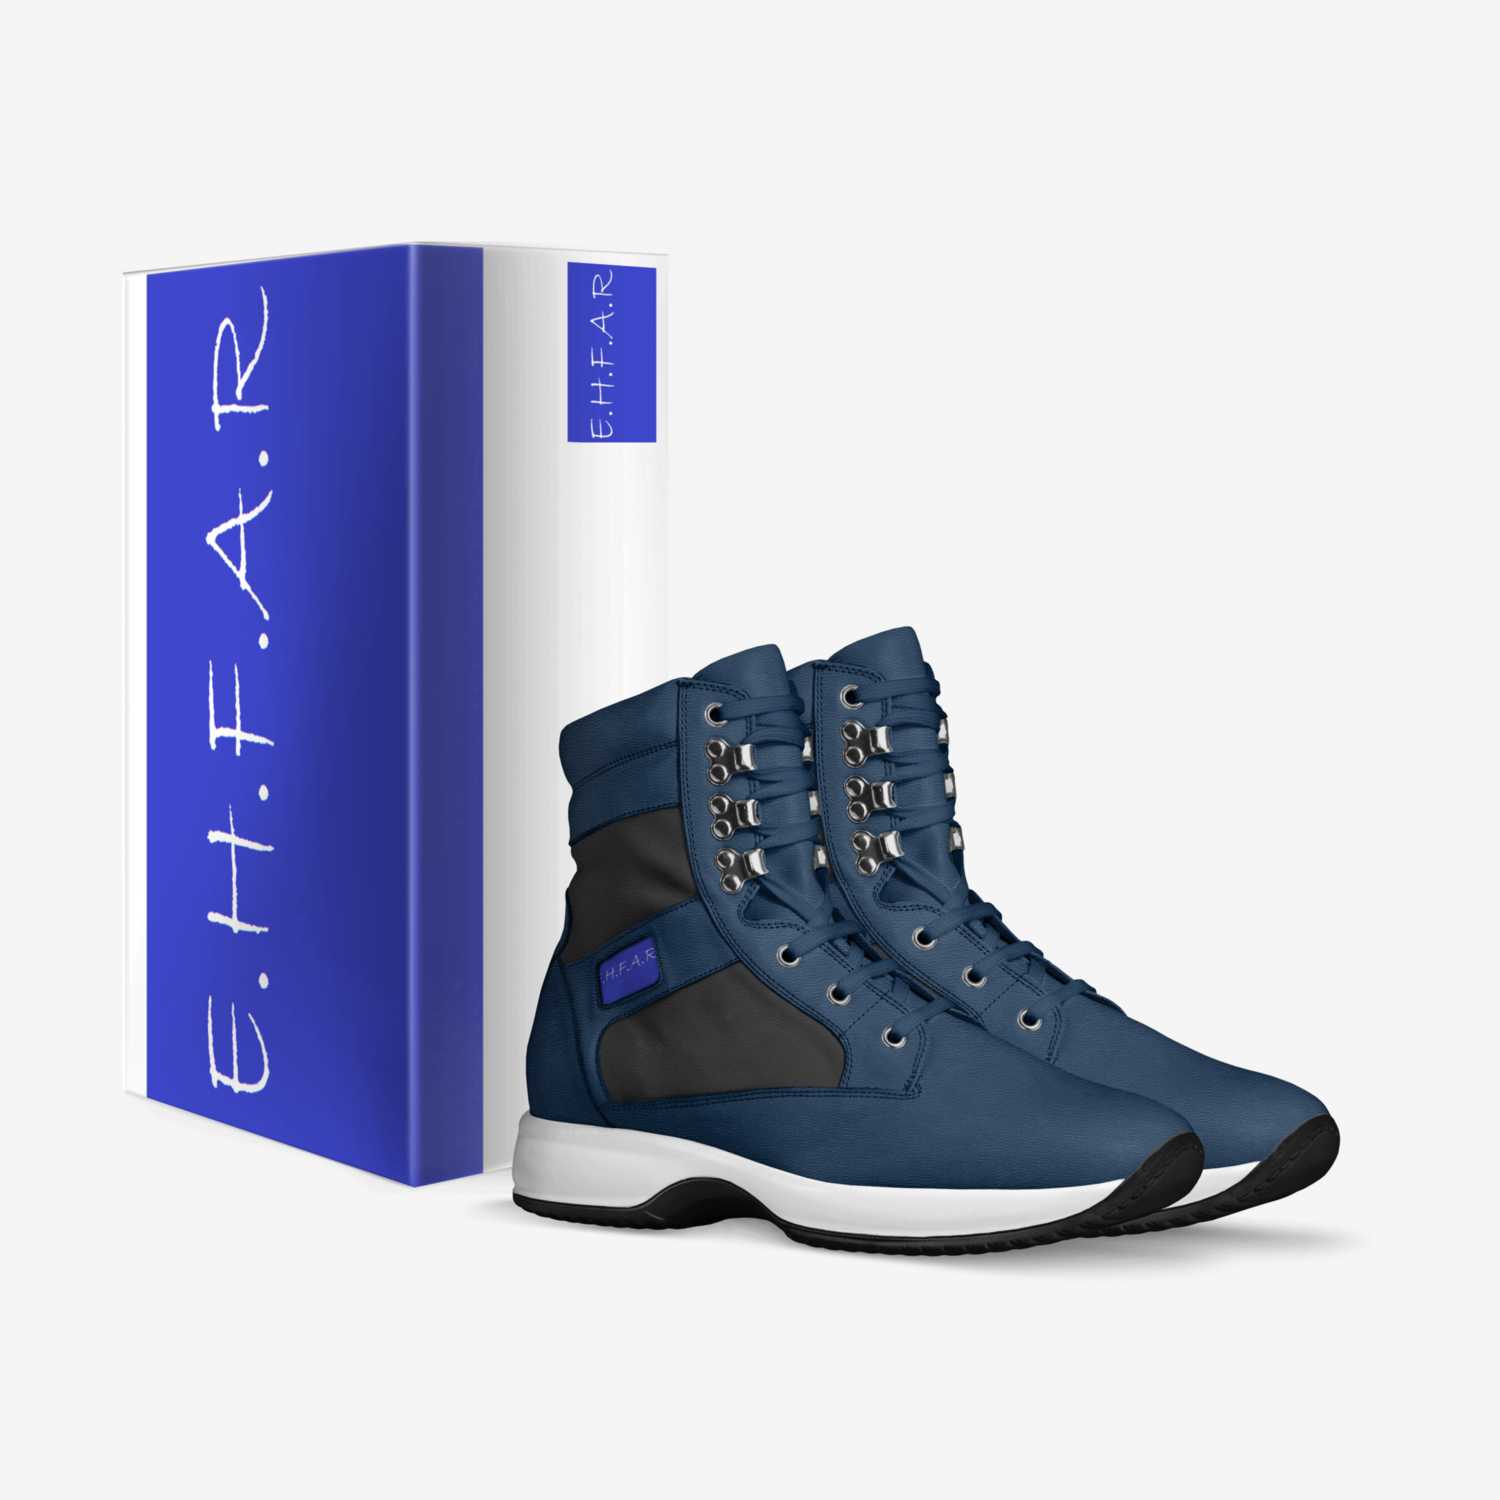 EHFAR custom made in Italy shoes by Brian Adin | Box view